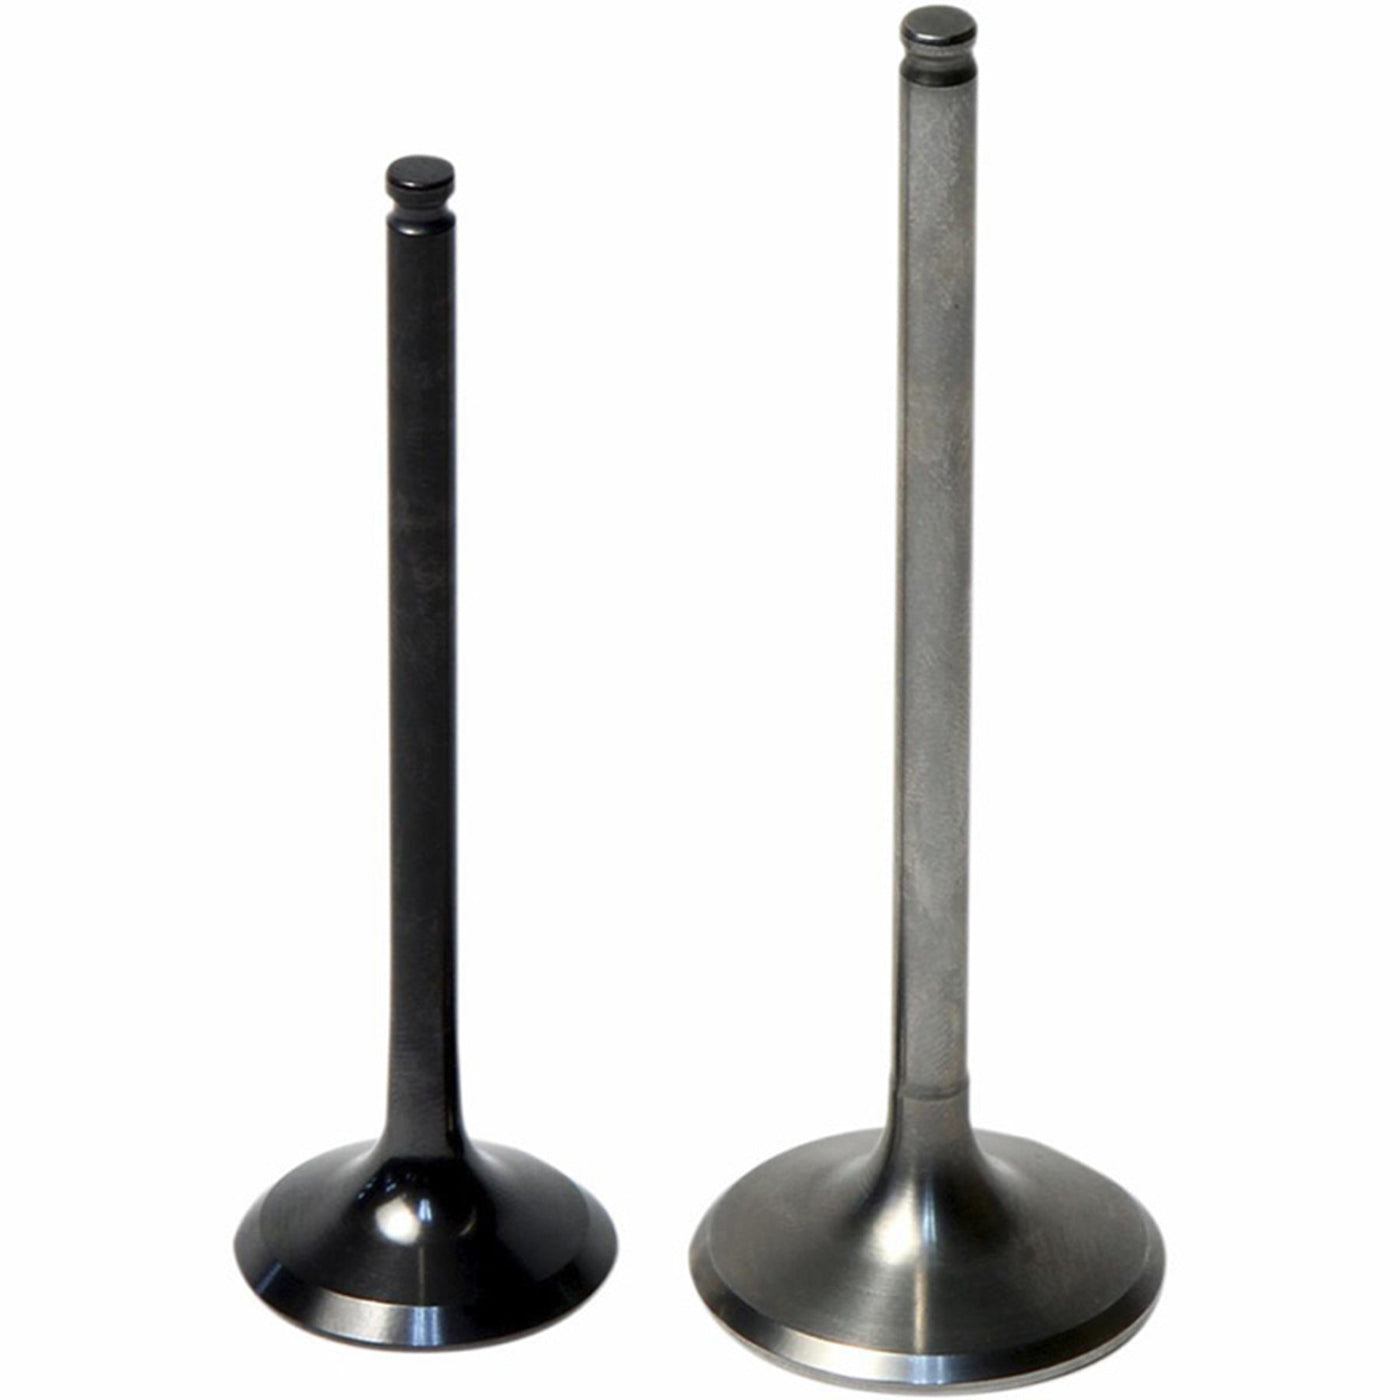 Hotcams 8400001-1 Intake and Exhaust Valves #8400001-1